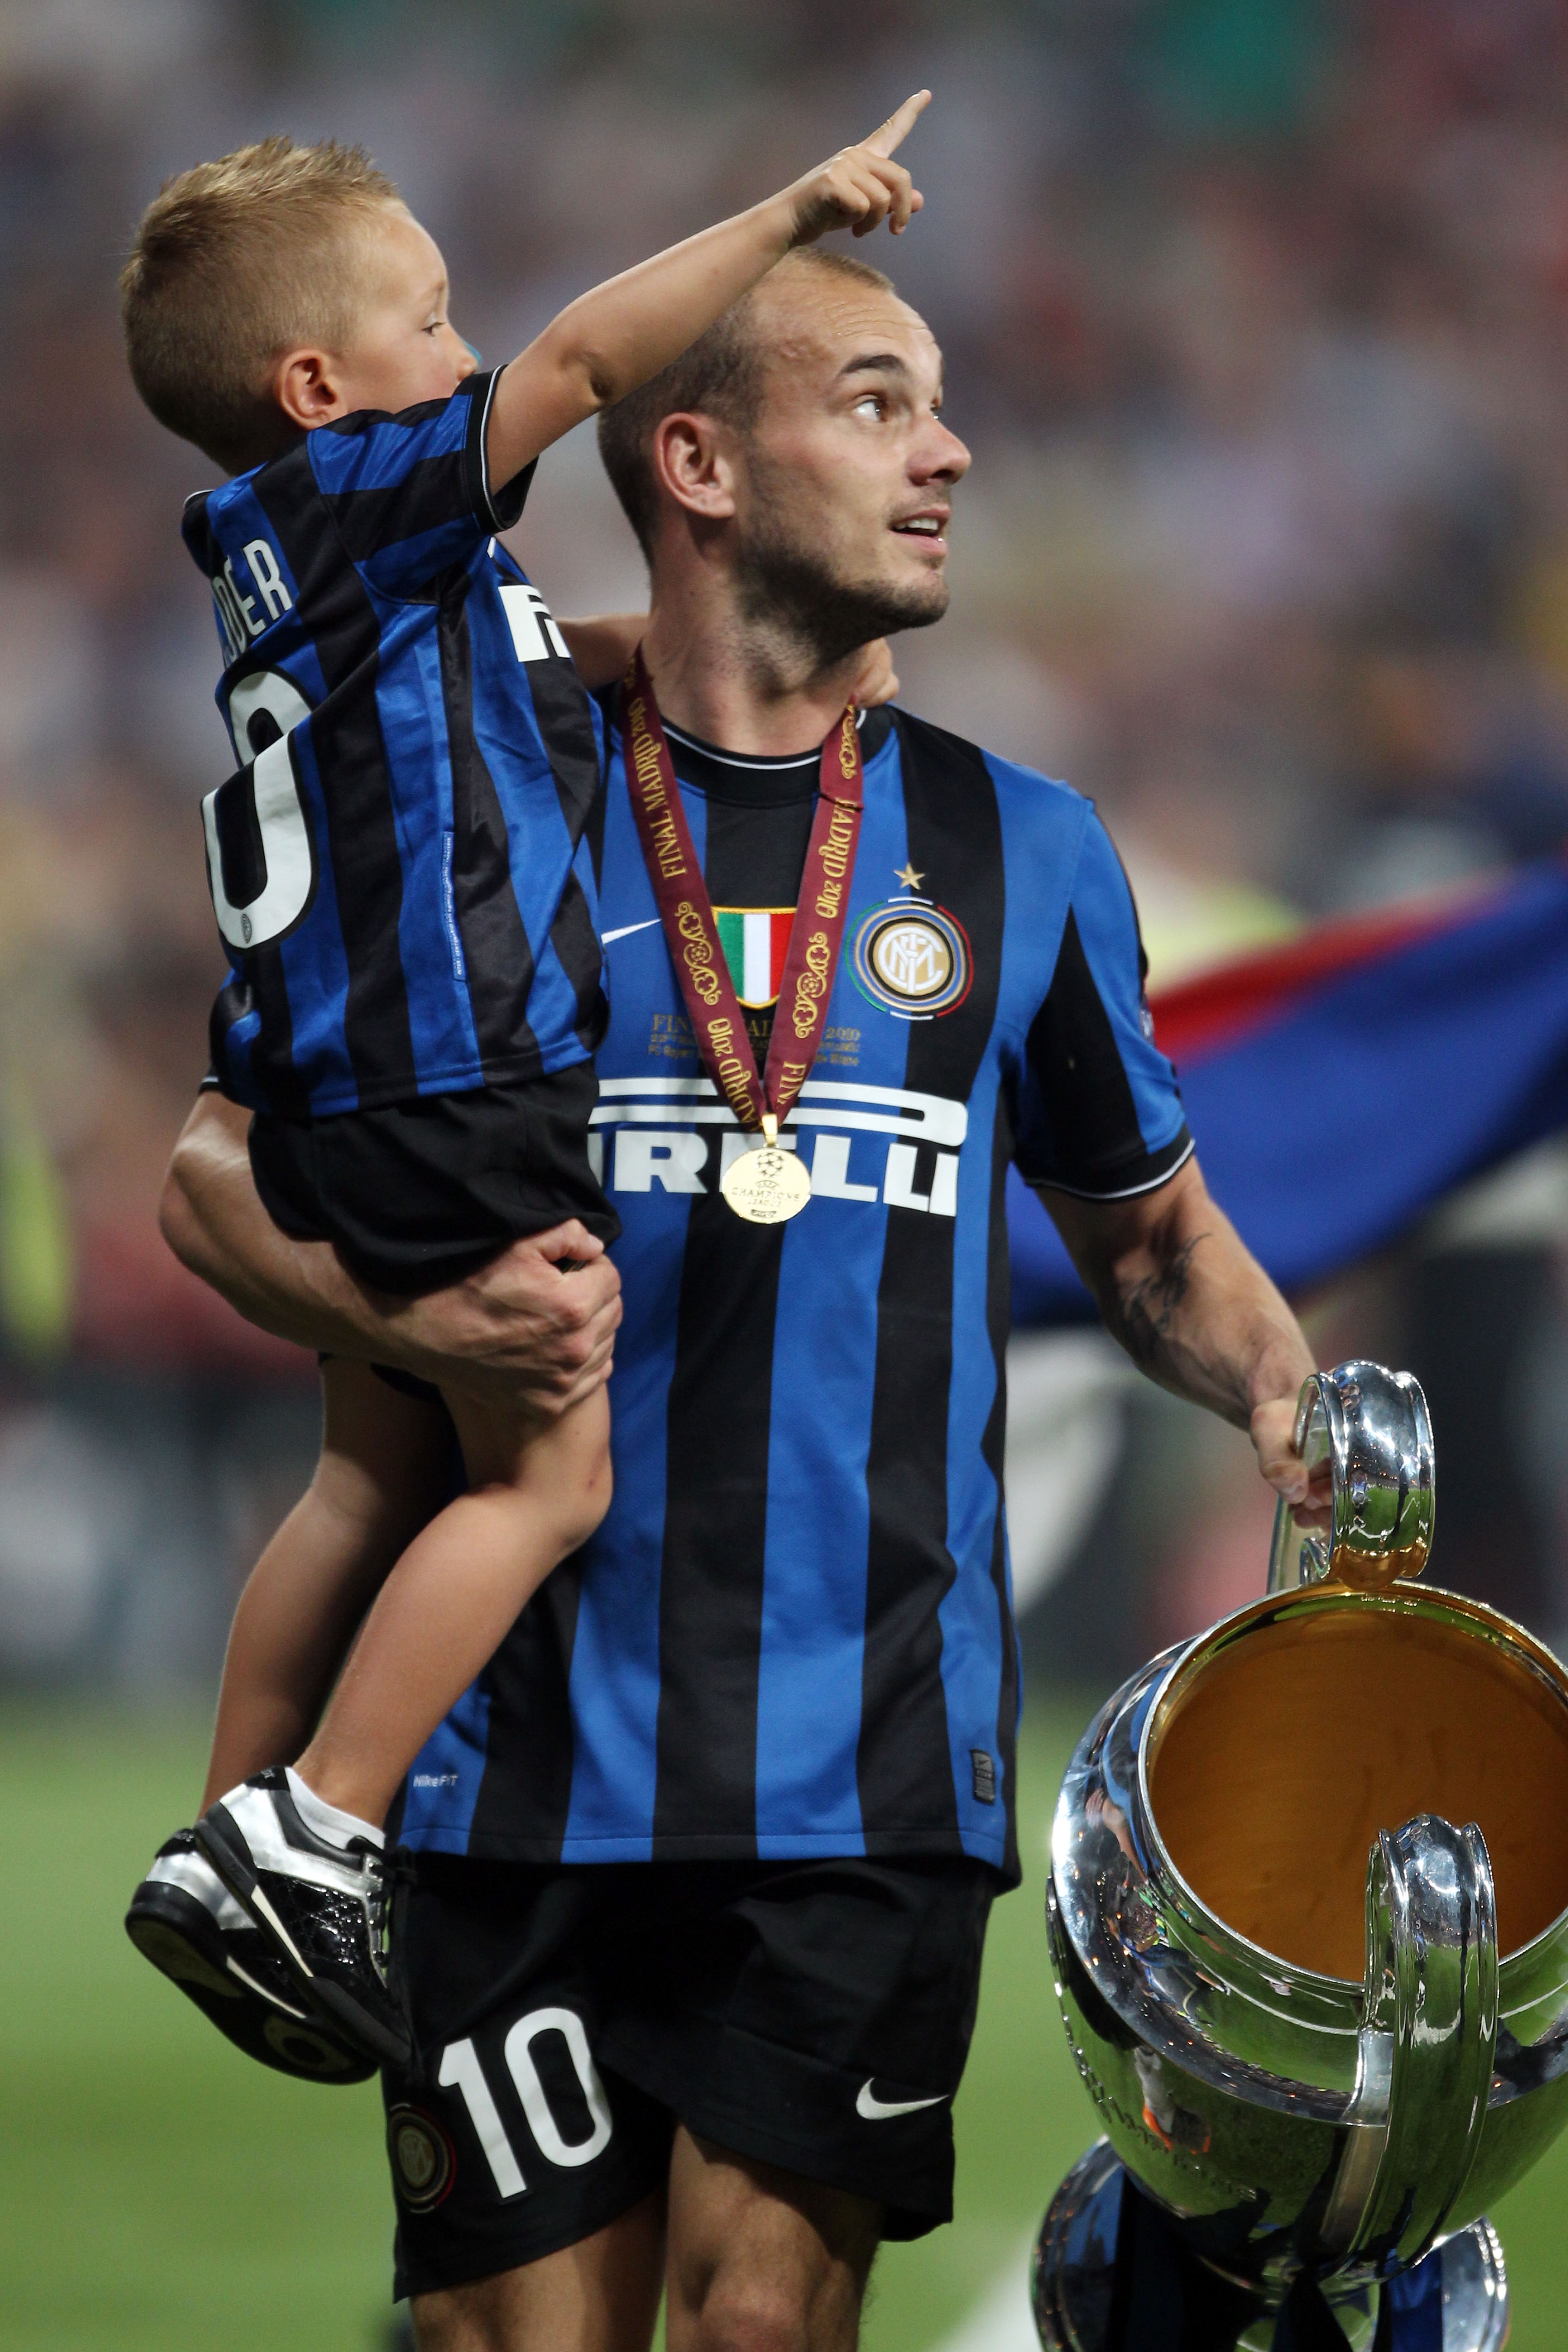 MADRID, SPAIN - MAY 22:  Wesley Sneijder of Inter Milan and his son celebrate with the UEFA Champions League trophy at the end of the UEFA Champions League Final match between FC Bayern Muenchen and Inter Milan at the Estadio Santiago Bernabeu on May 22,